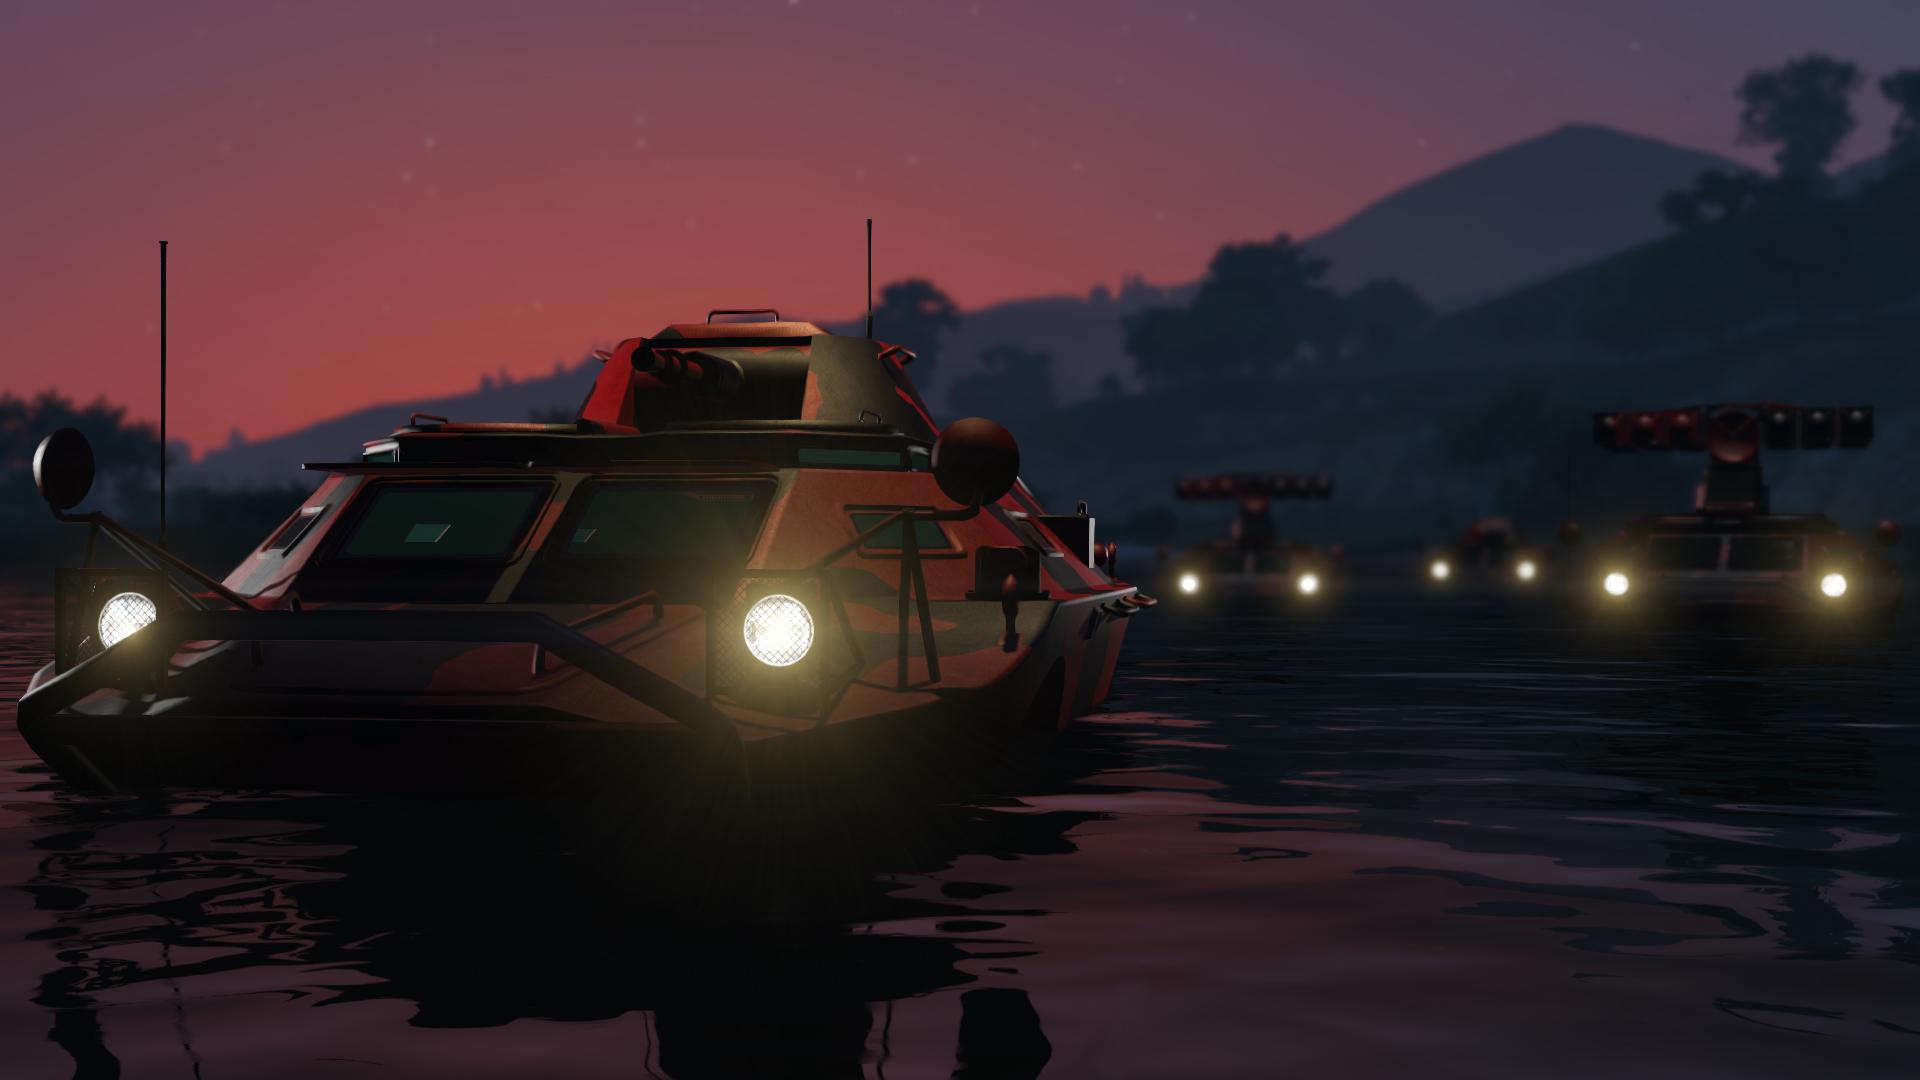 Screenshot №32 from game Grand Theft Auto V